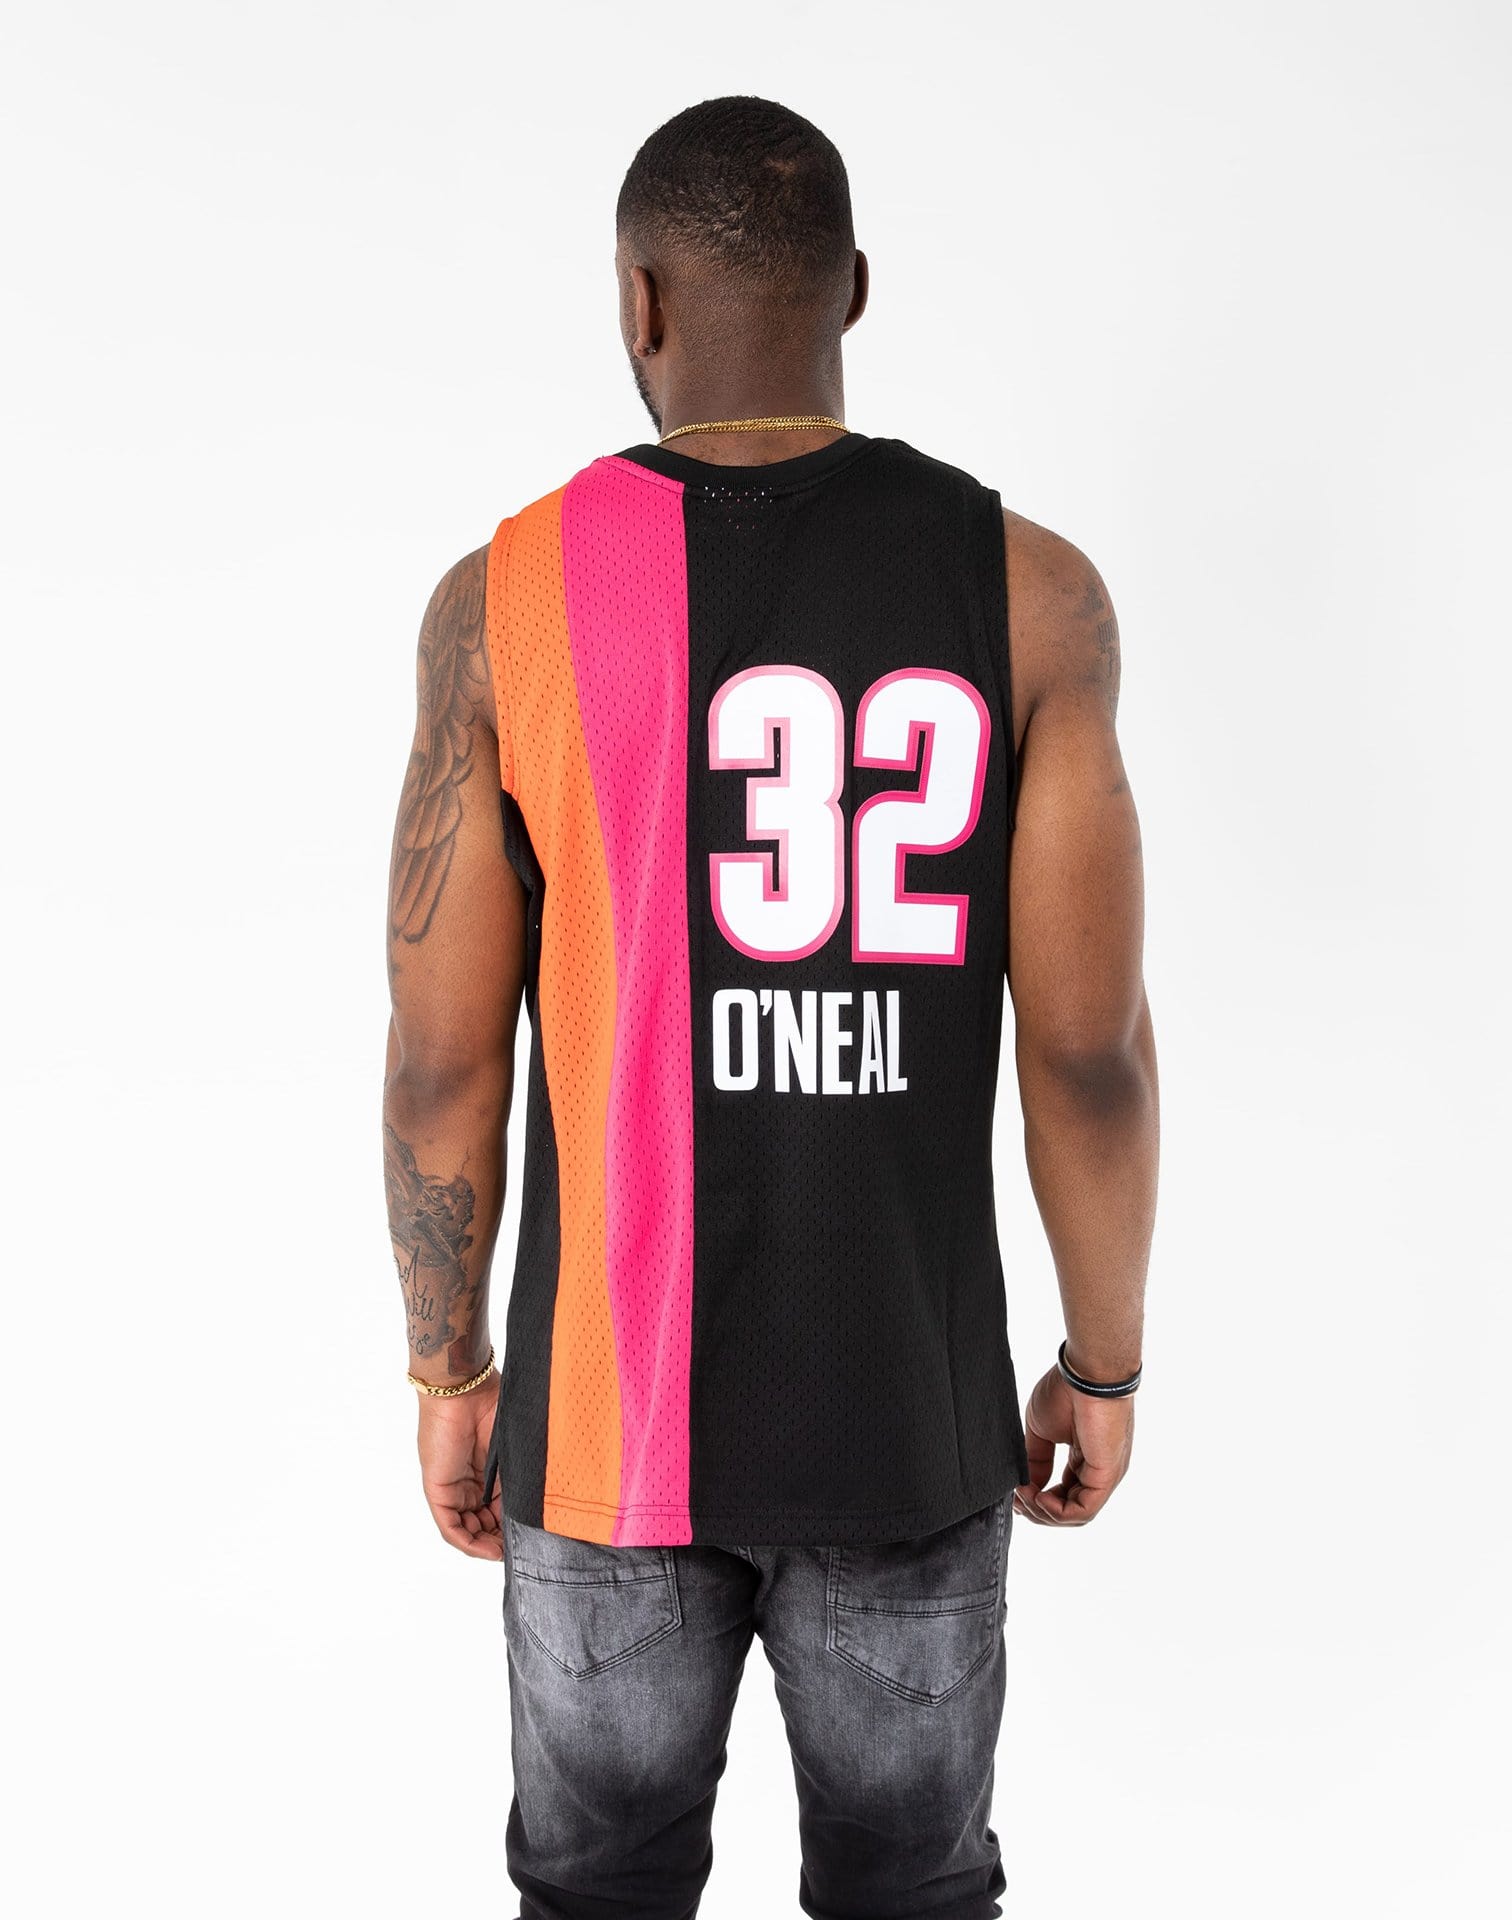 Shop Mitchell & Ness Miami Heat Shaquille O'Neal 2005-2006 Swingman Jersey  SMJYCP19243-MHEBLCK05SON black